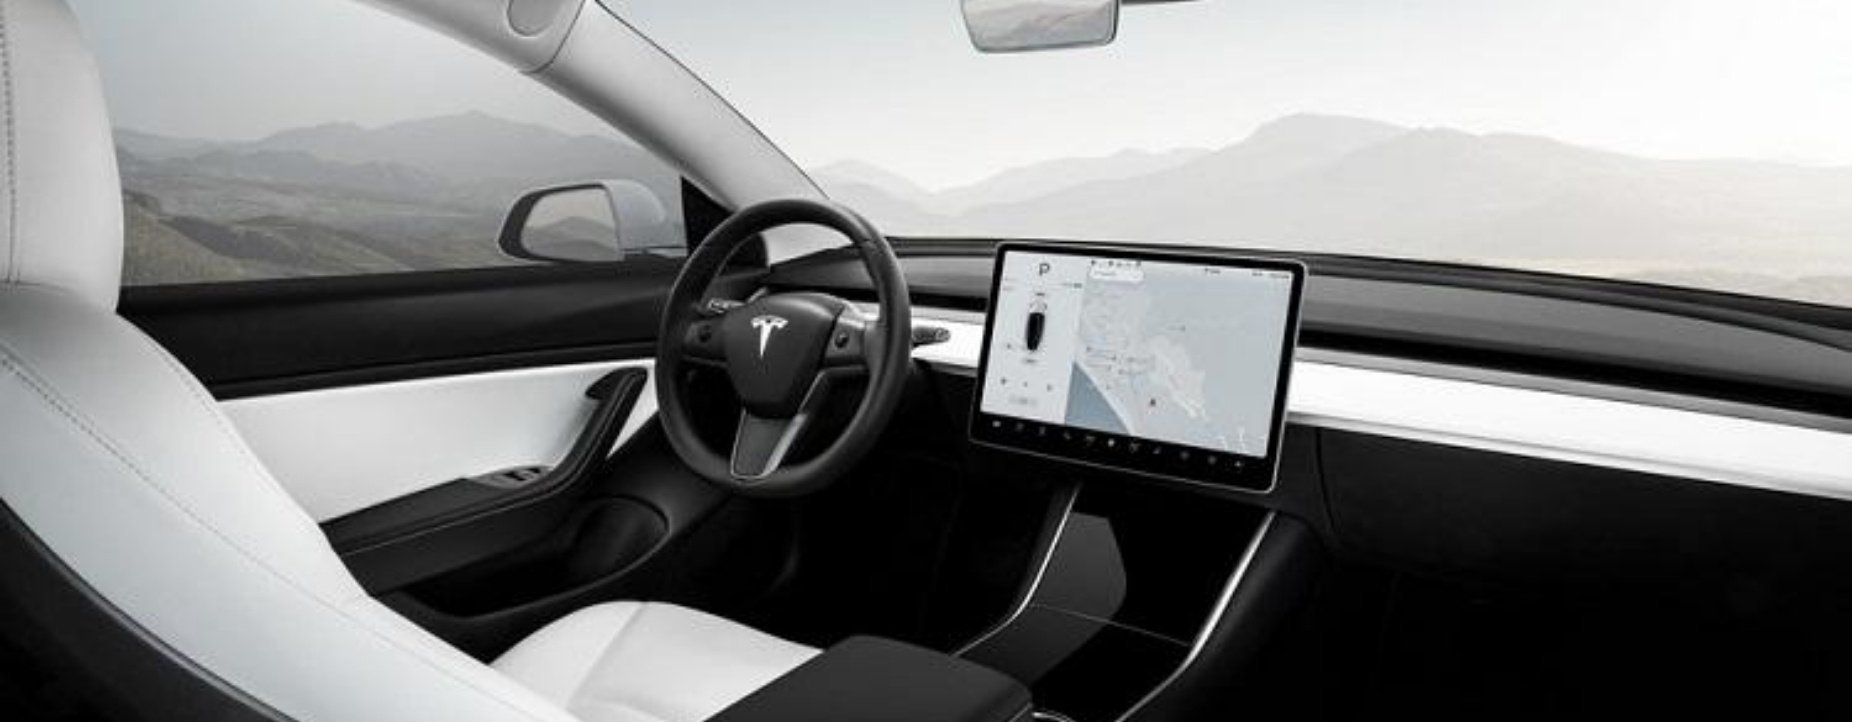 Buy Tesla model and accessories (tesla model y accessories) at any time of the day post thumbnail image